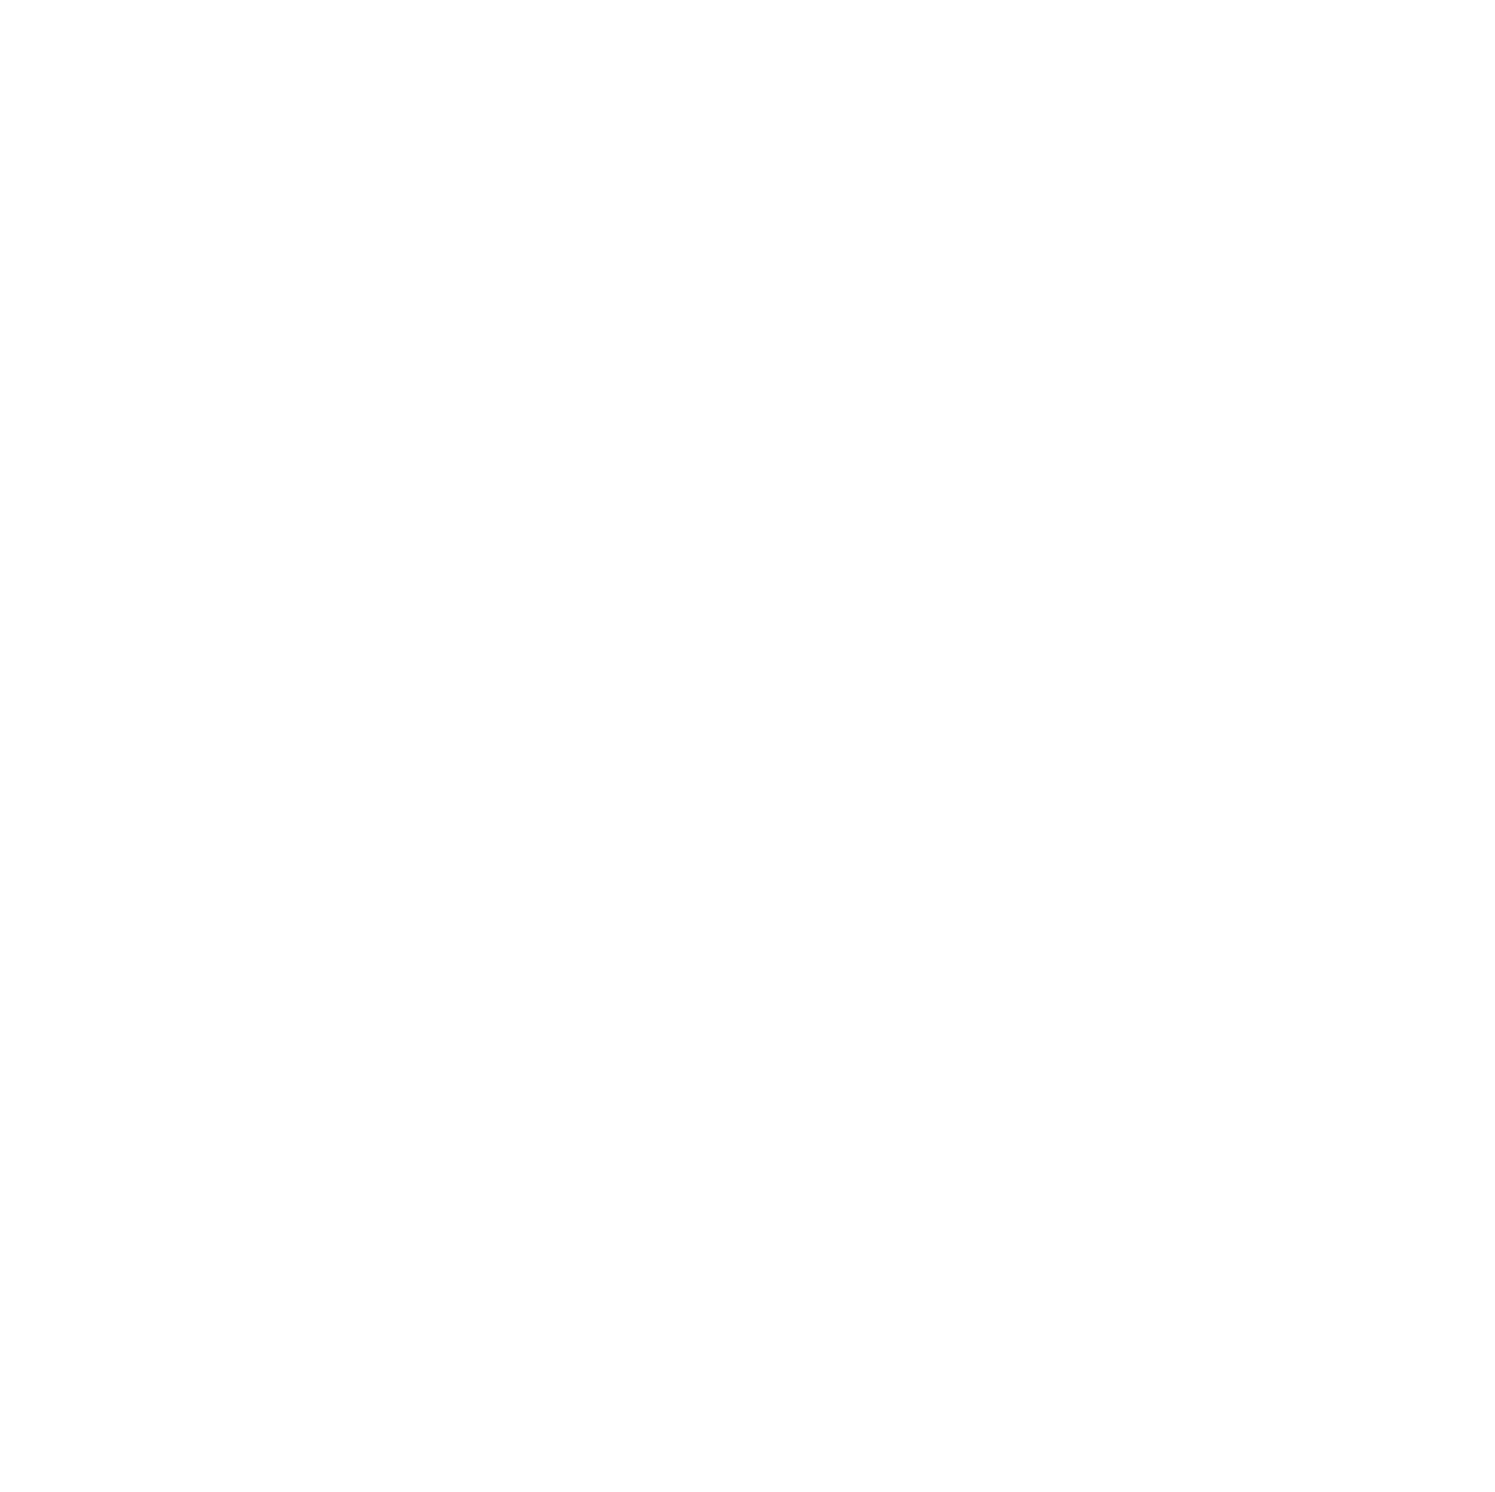 Marcopolo logo for dark backgrounds (transparent PNG)